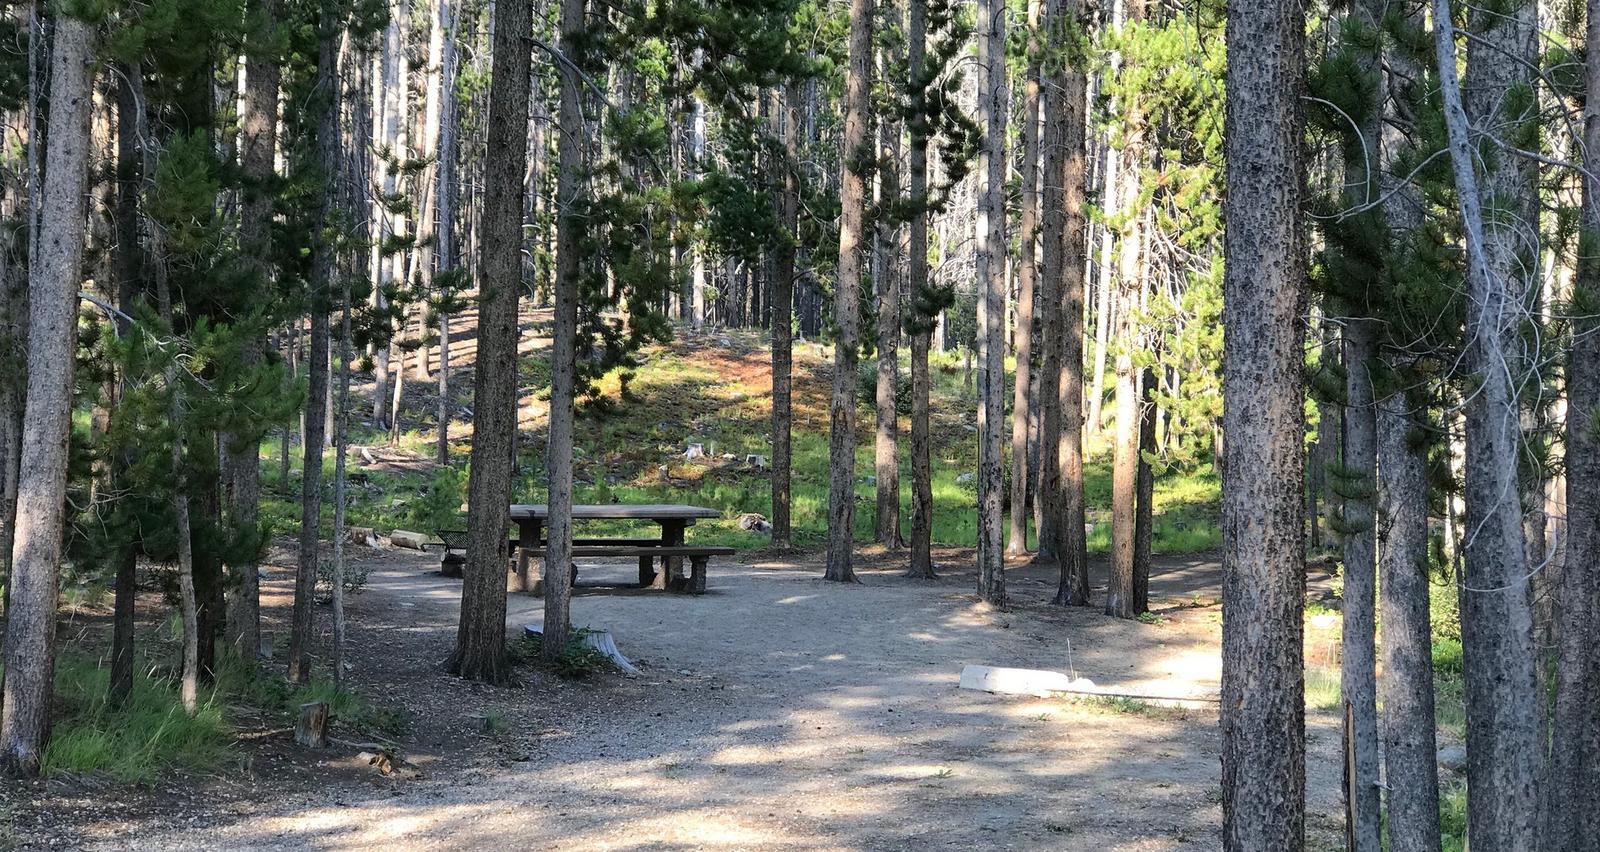 picnic table in campsite in wooded areacampsite in wooded area